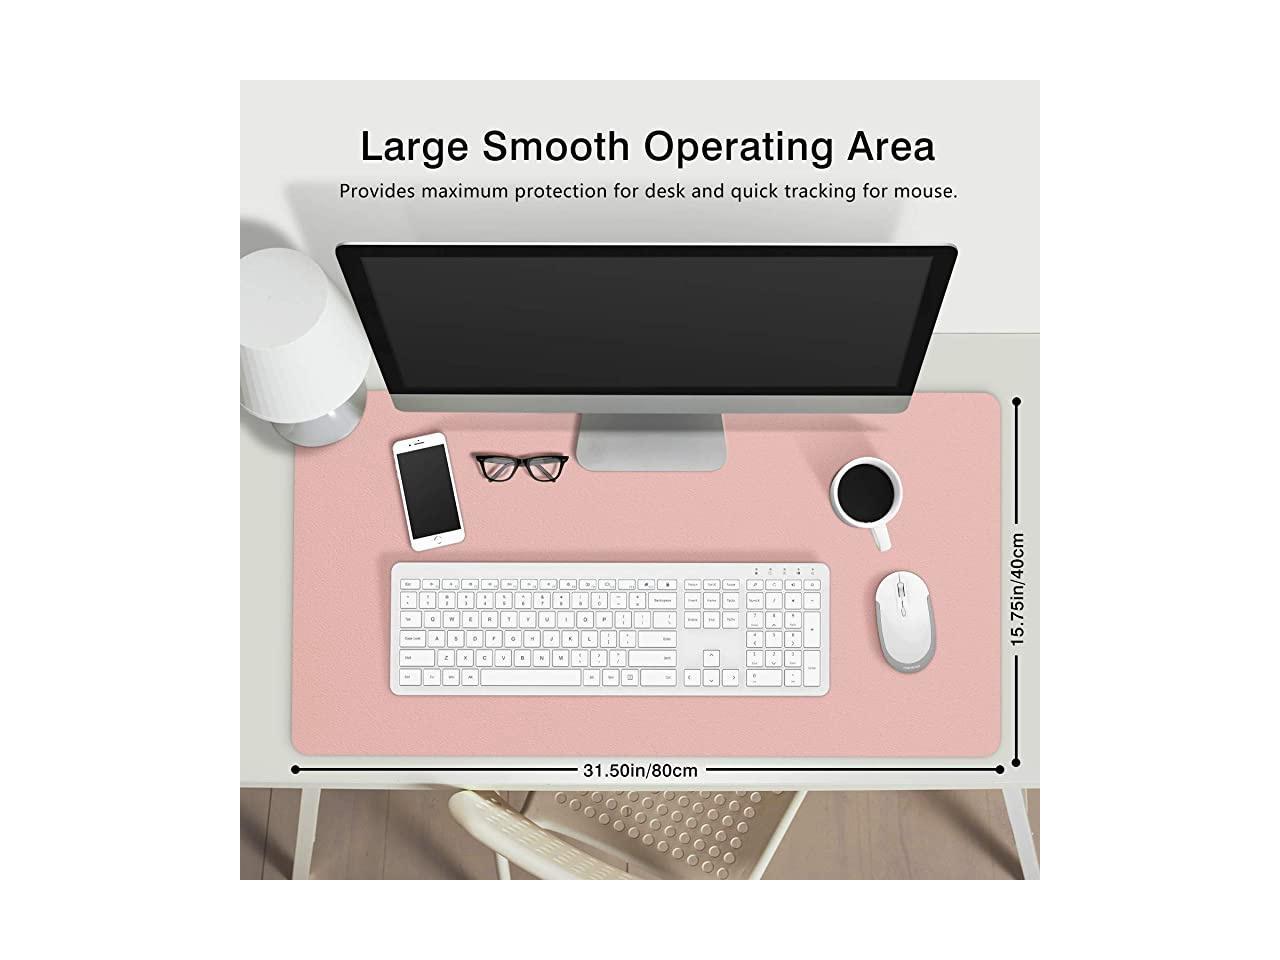 Waterproof and Non-Slip Double Side Desk Protector Office and Gaming Desk Mat KELIFANG Mouse Pad 31.5”x15.7”, Pink/Sliver Portable Large PU Leather Premium Textured Computer Desk Pad